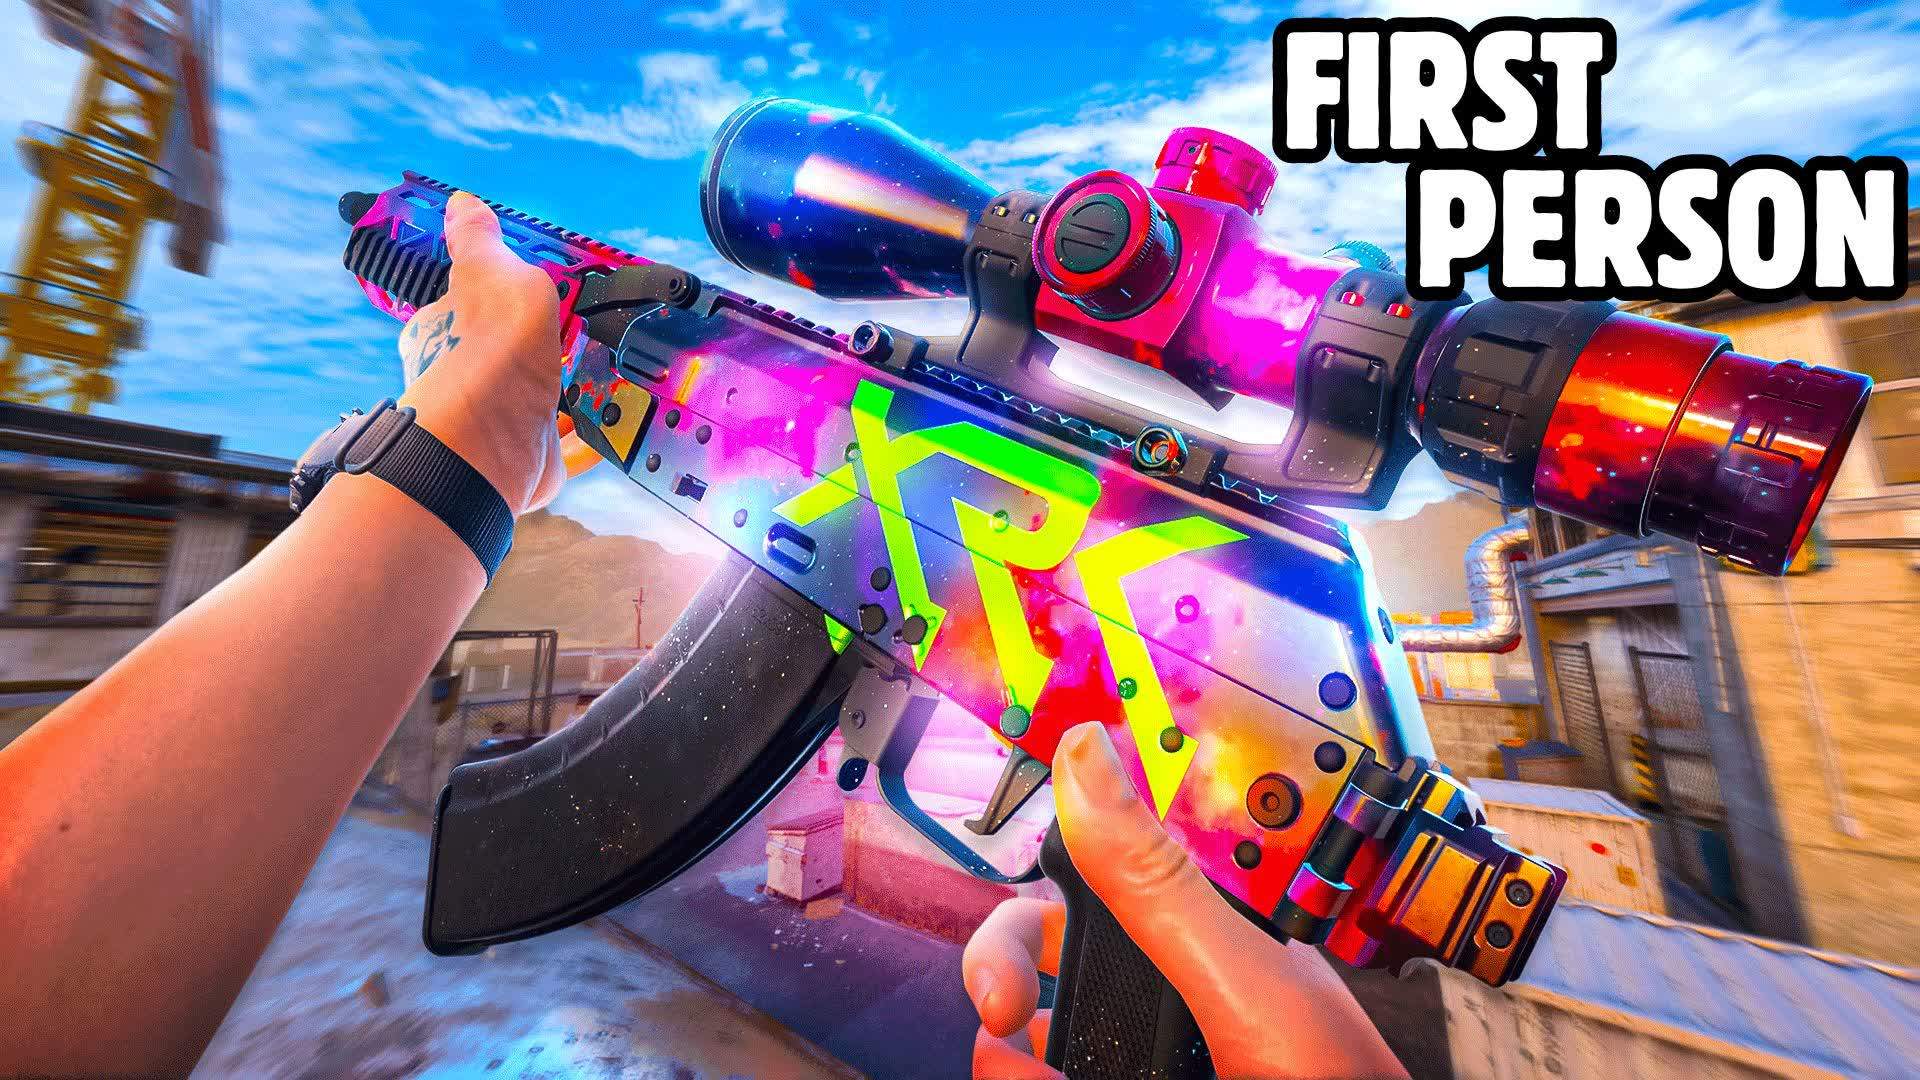 FIRST PERSON GUN GAME - GREASY GROVE